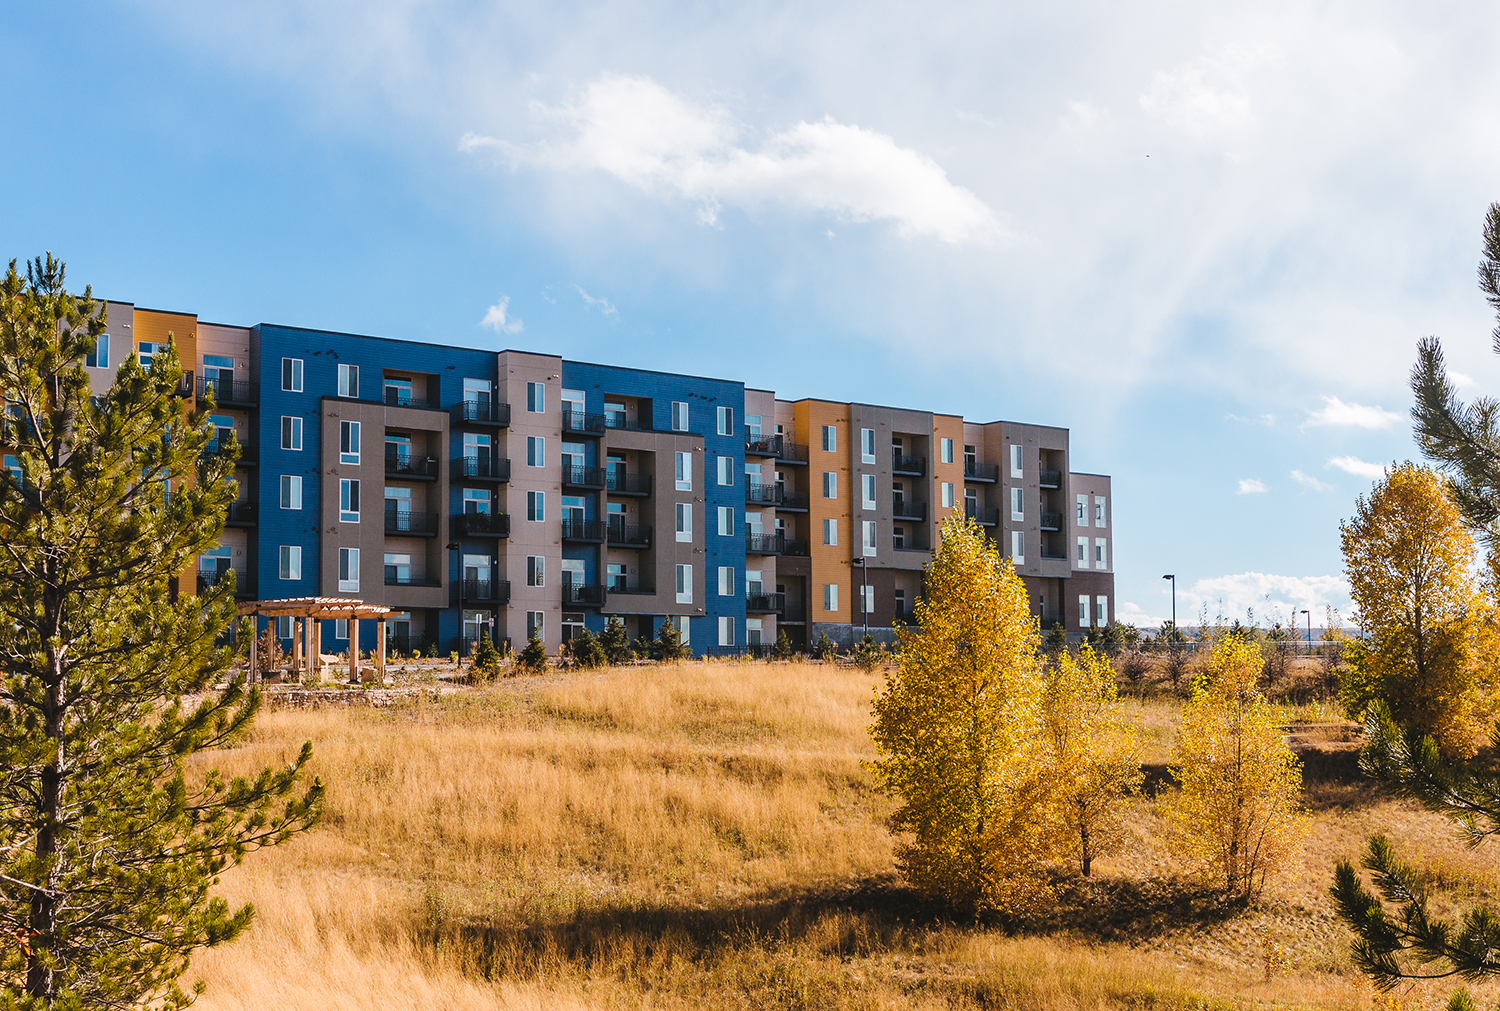   LOCATION:  LONE TREE, CO   CLIENT:  HOLLAND PARTNER GROUP   SIZE:  230 UNITS   DENSITY:  67.1 DU/ACRE   PARKING:  349   BUILDING TYPE:  WOOD FRAME   CONSTRUCTION:  TYPE VA, 4-STORY  MORE INFO+ 